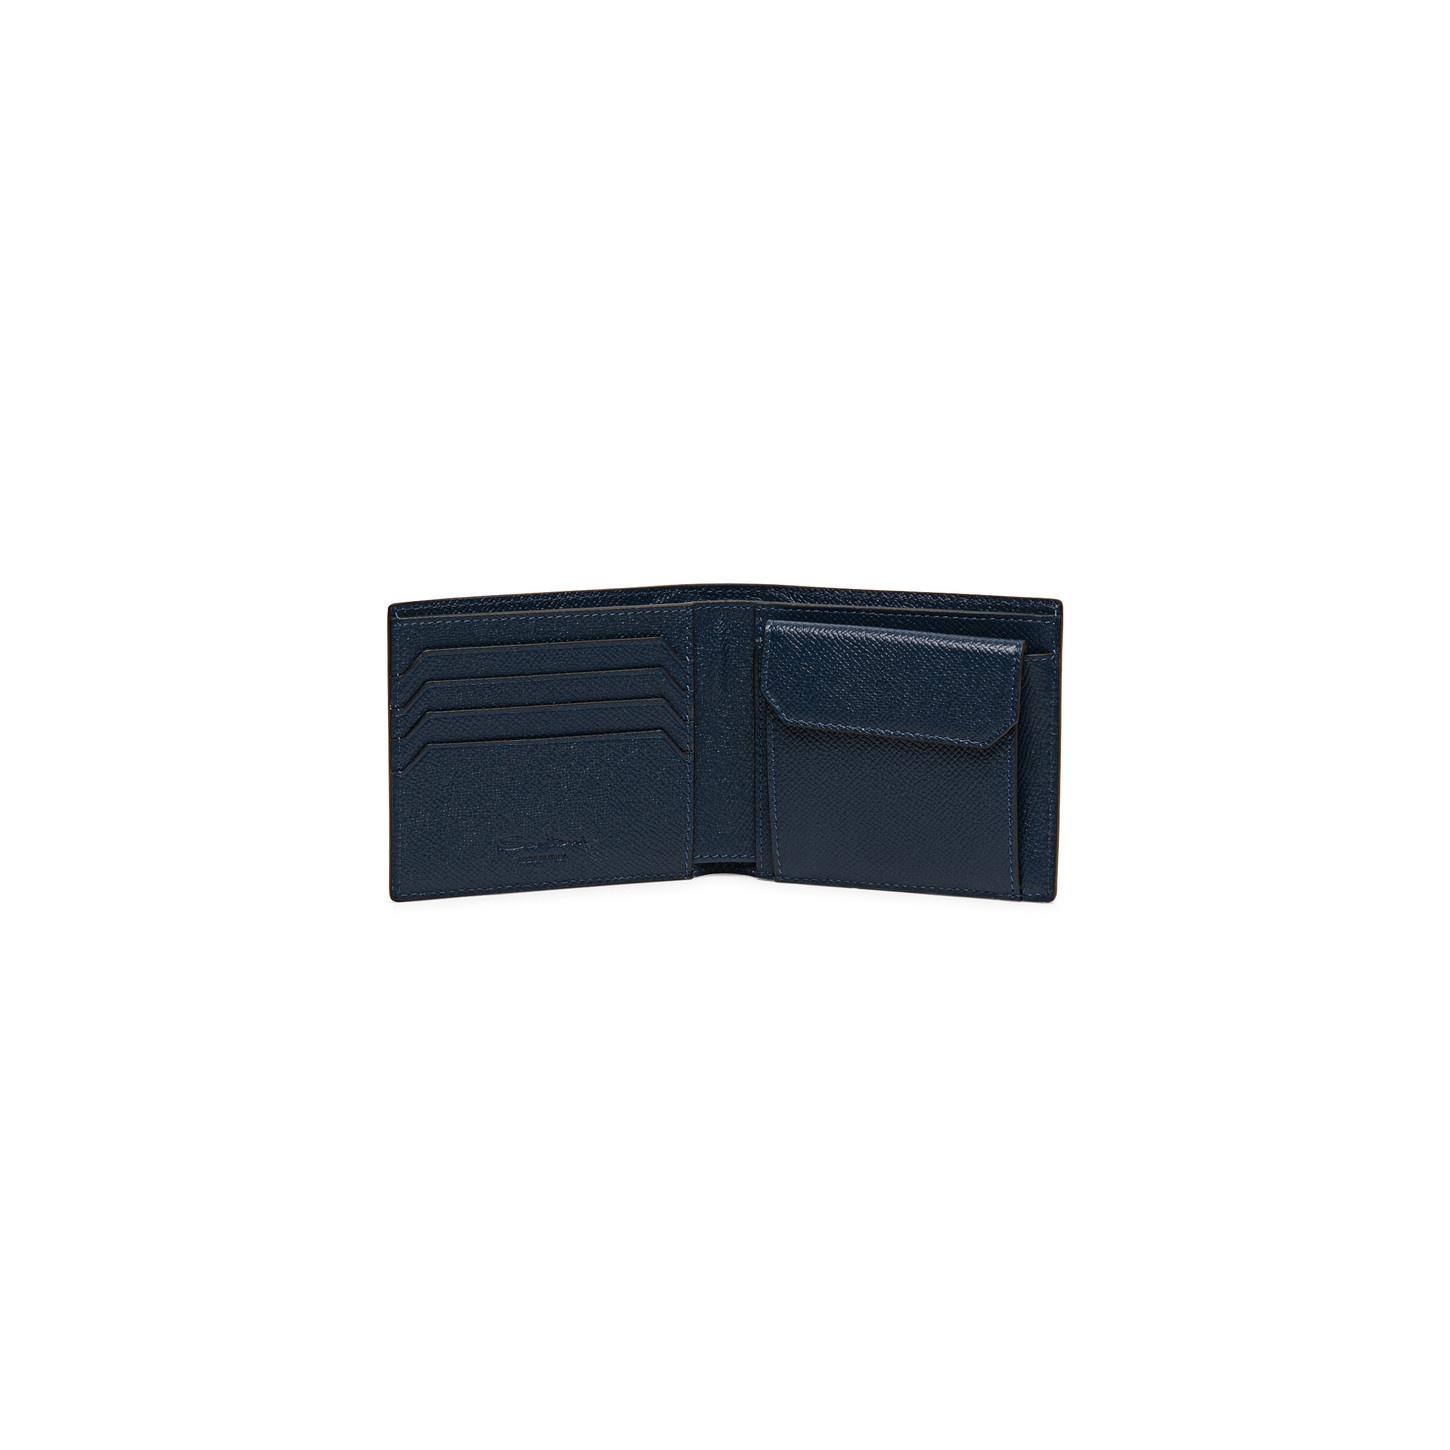 Blue saffiano leather wallet with coin pocket - 3